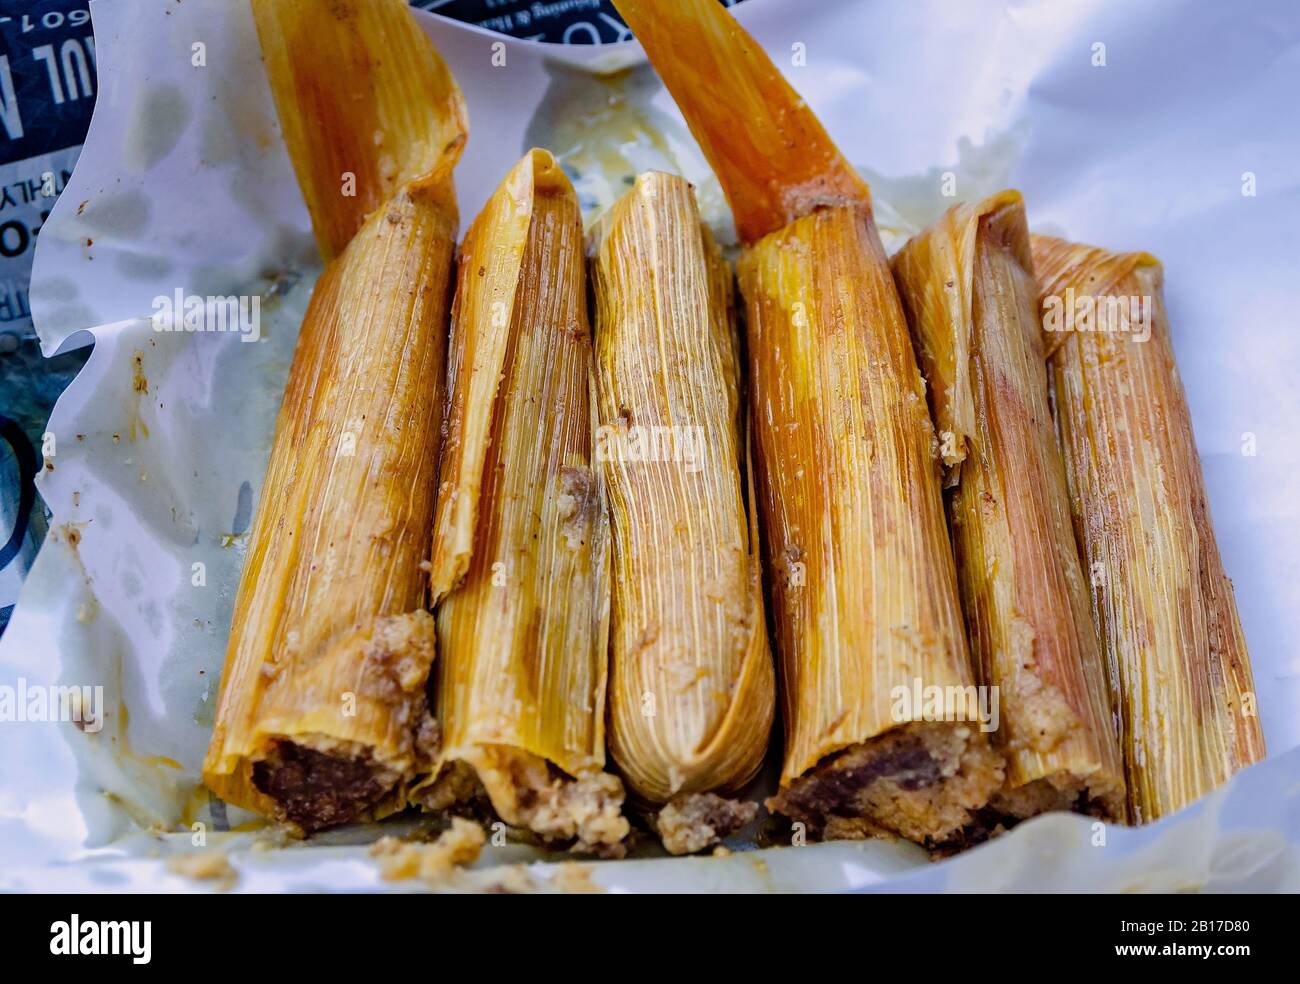 A to-go order of hot tamales is pictured at The Tamale Place restaurant, July 26, 2019, in Vicksburg, Mississippi. Stock Photo